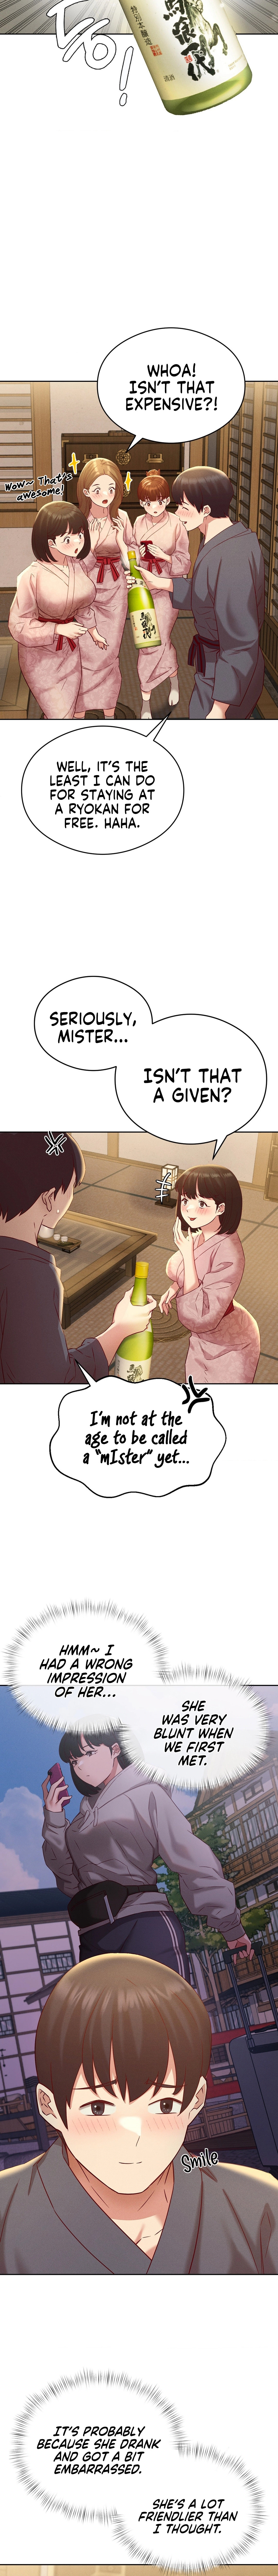 Shall We Go To The Ryokan Together? - Chapter 2 Page 8